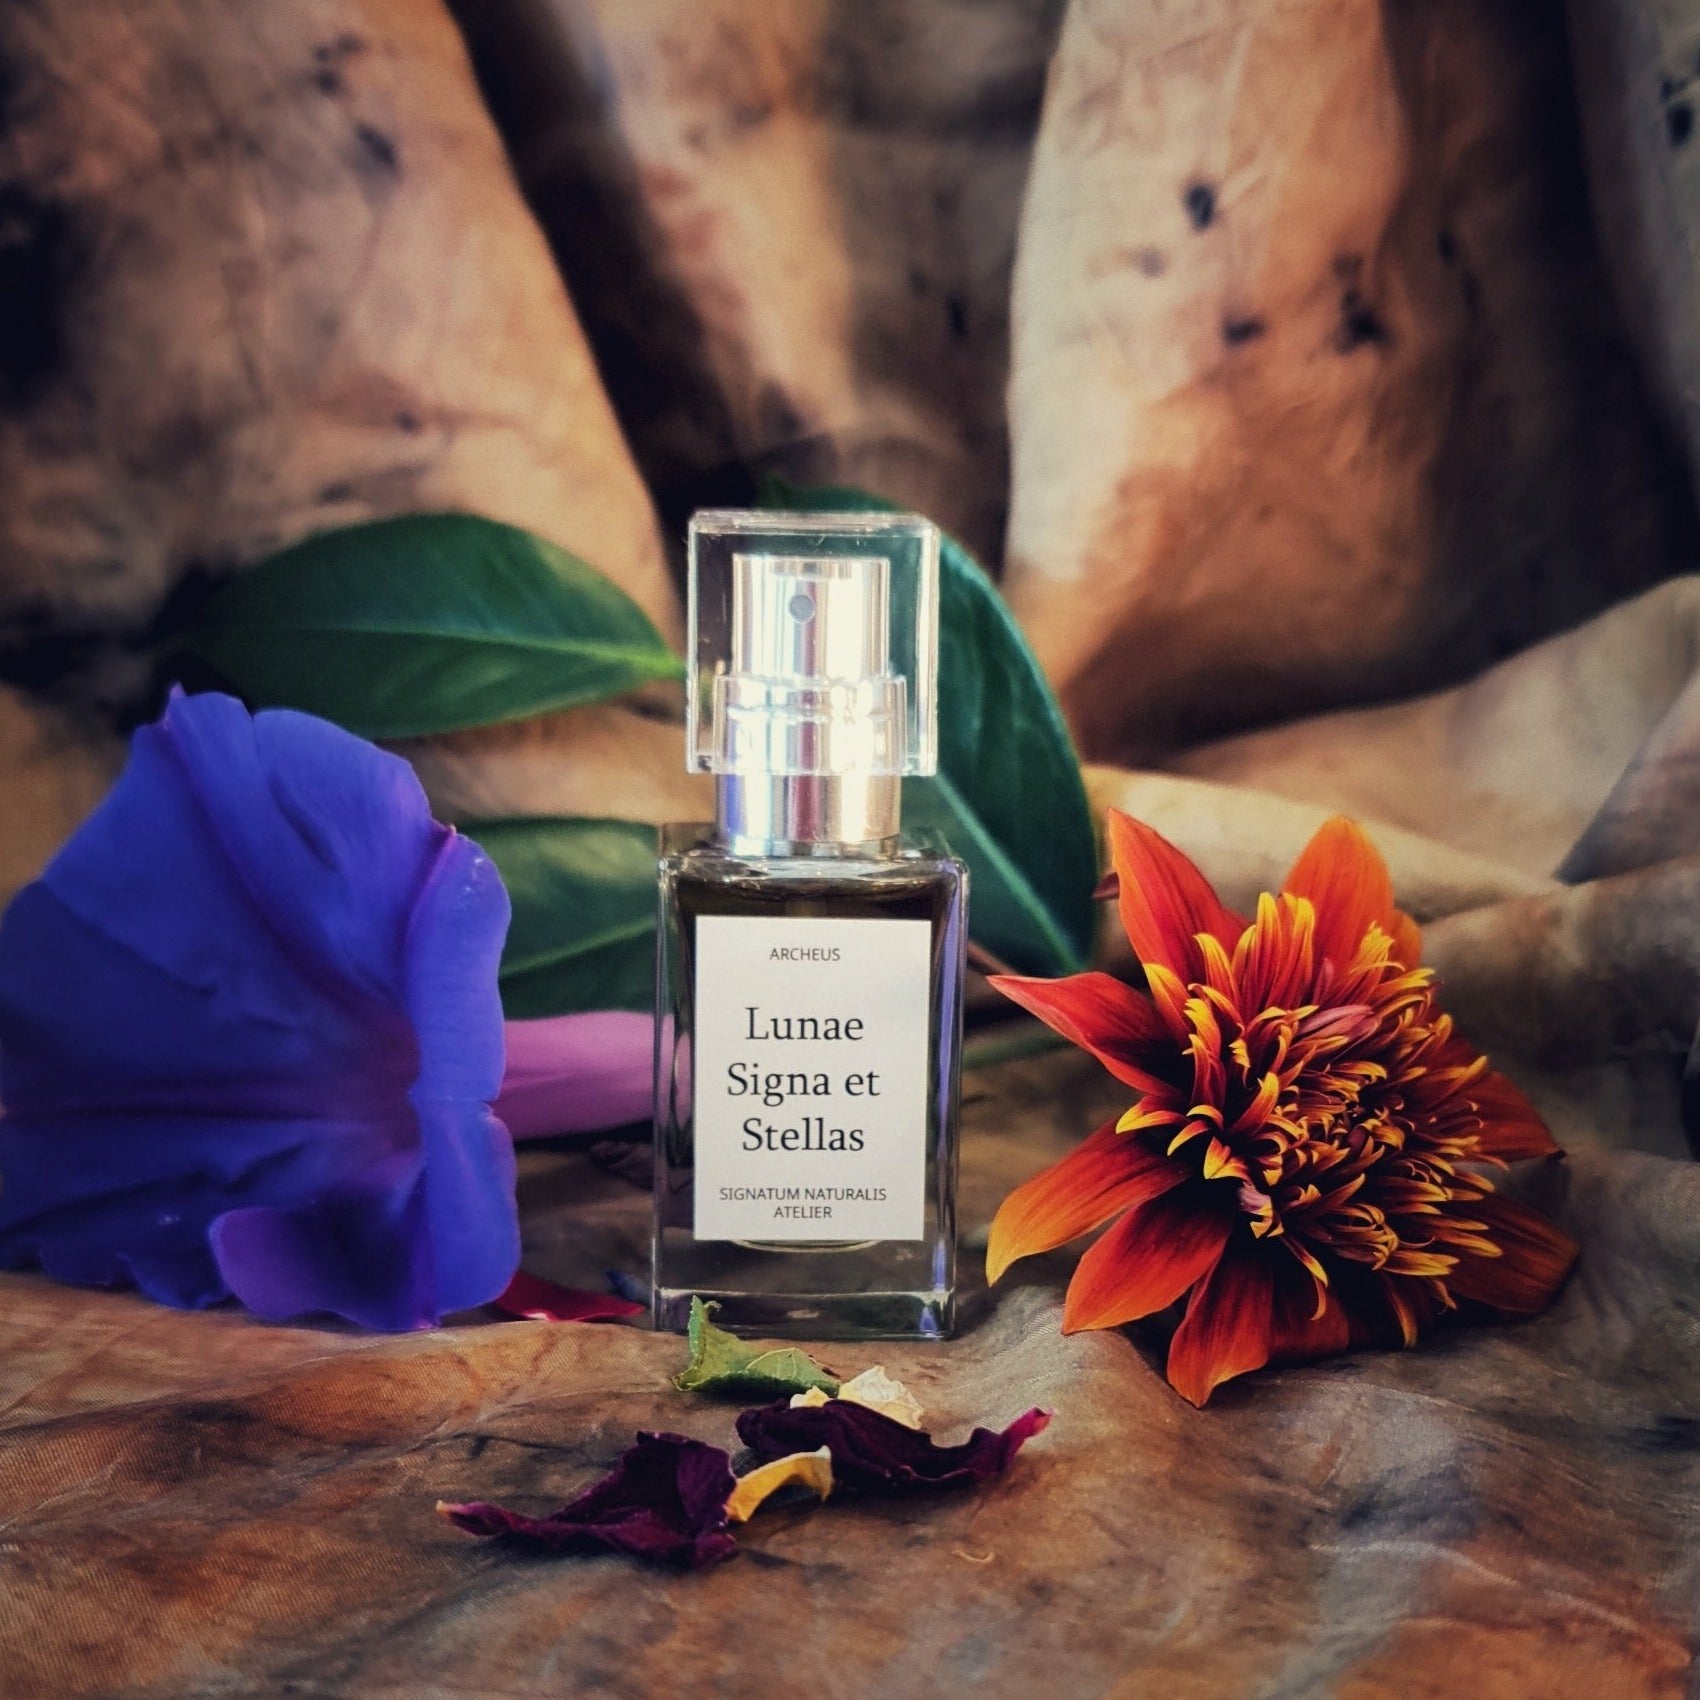 15ml bottle of Handcrafted limited edition natural perfume